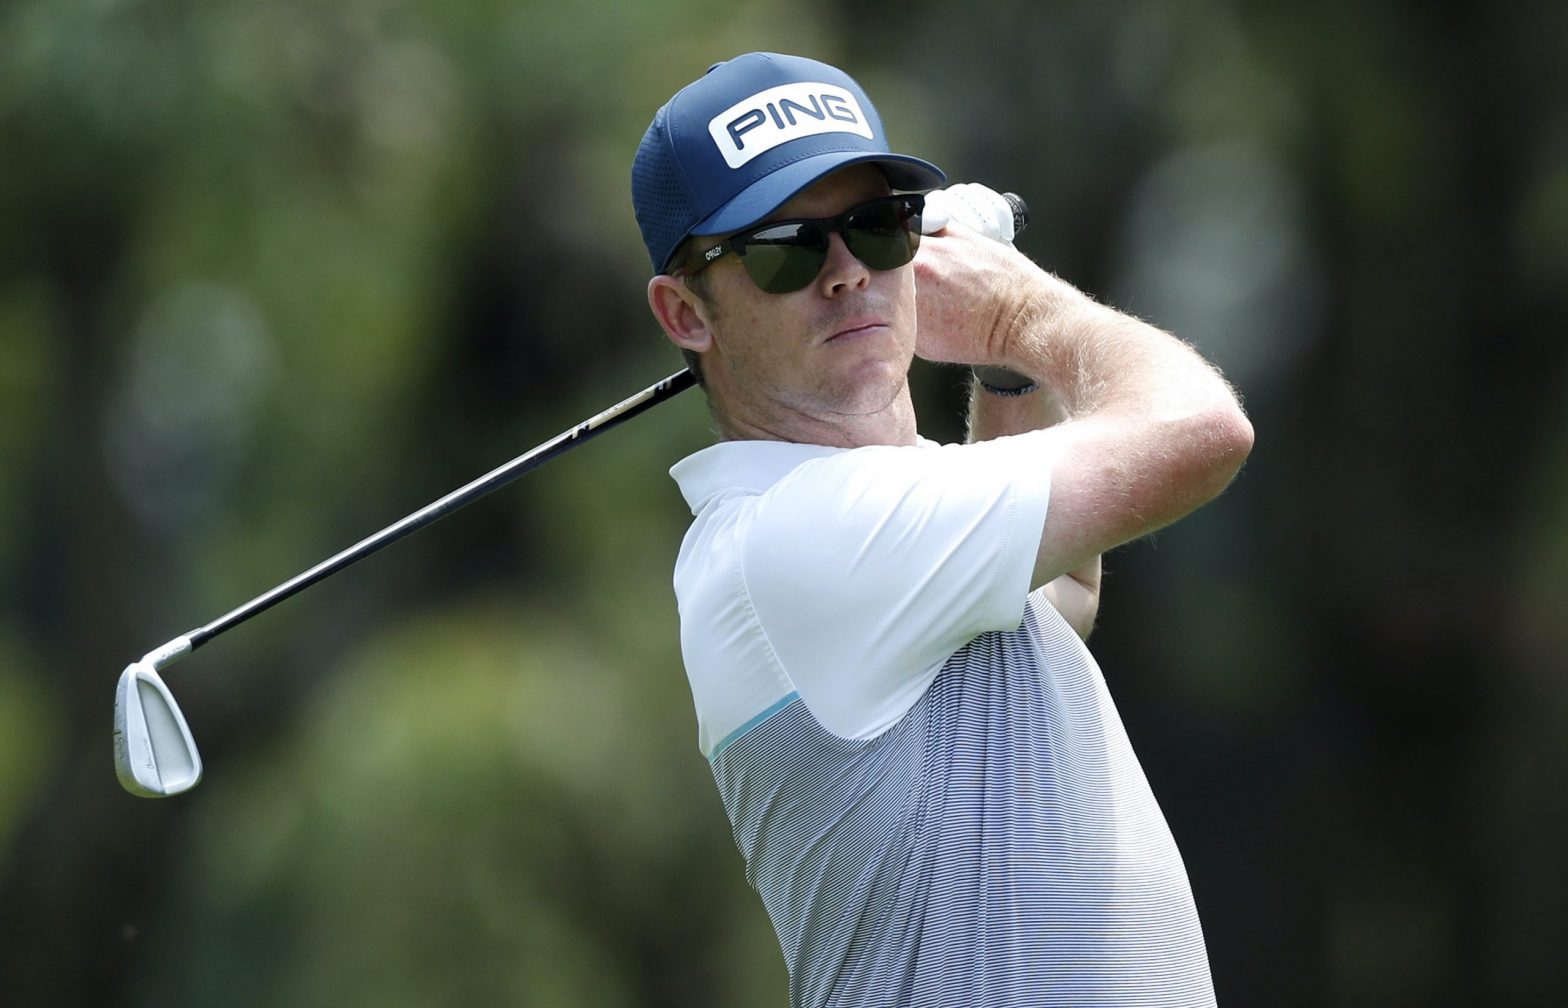 Stone ready to roll in Joburg Open